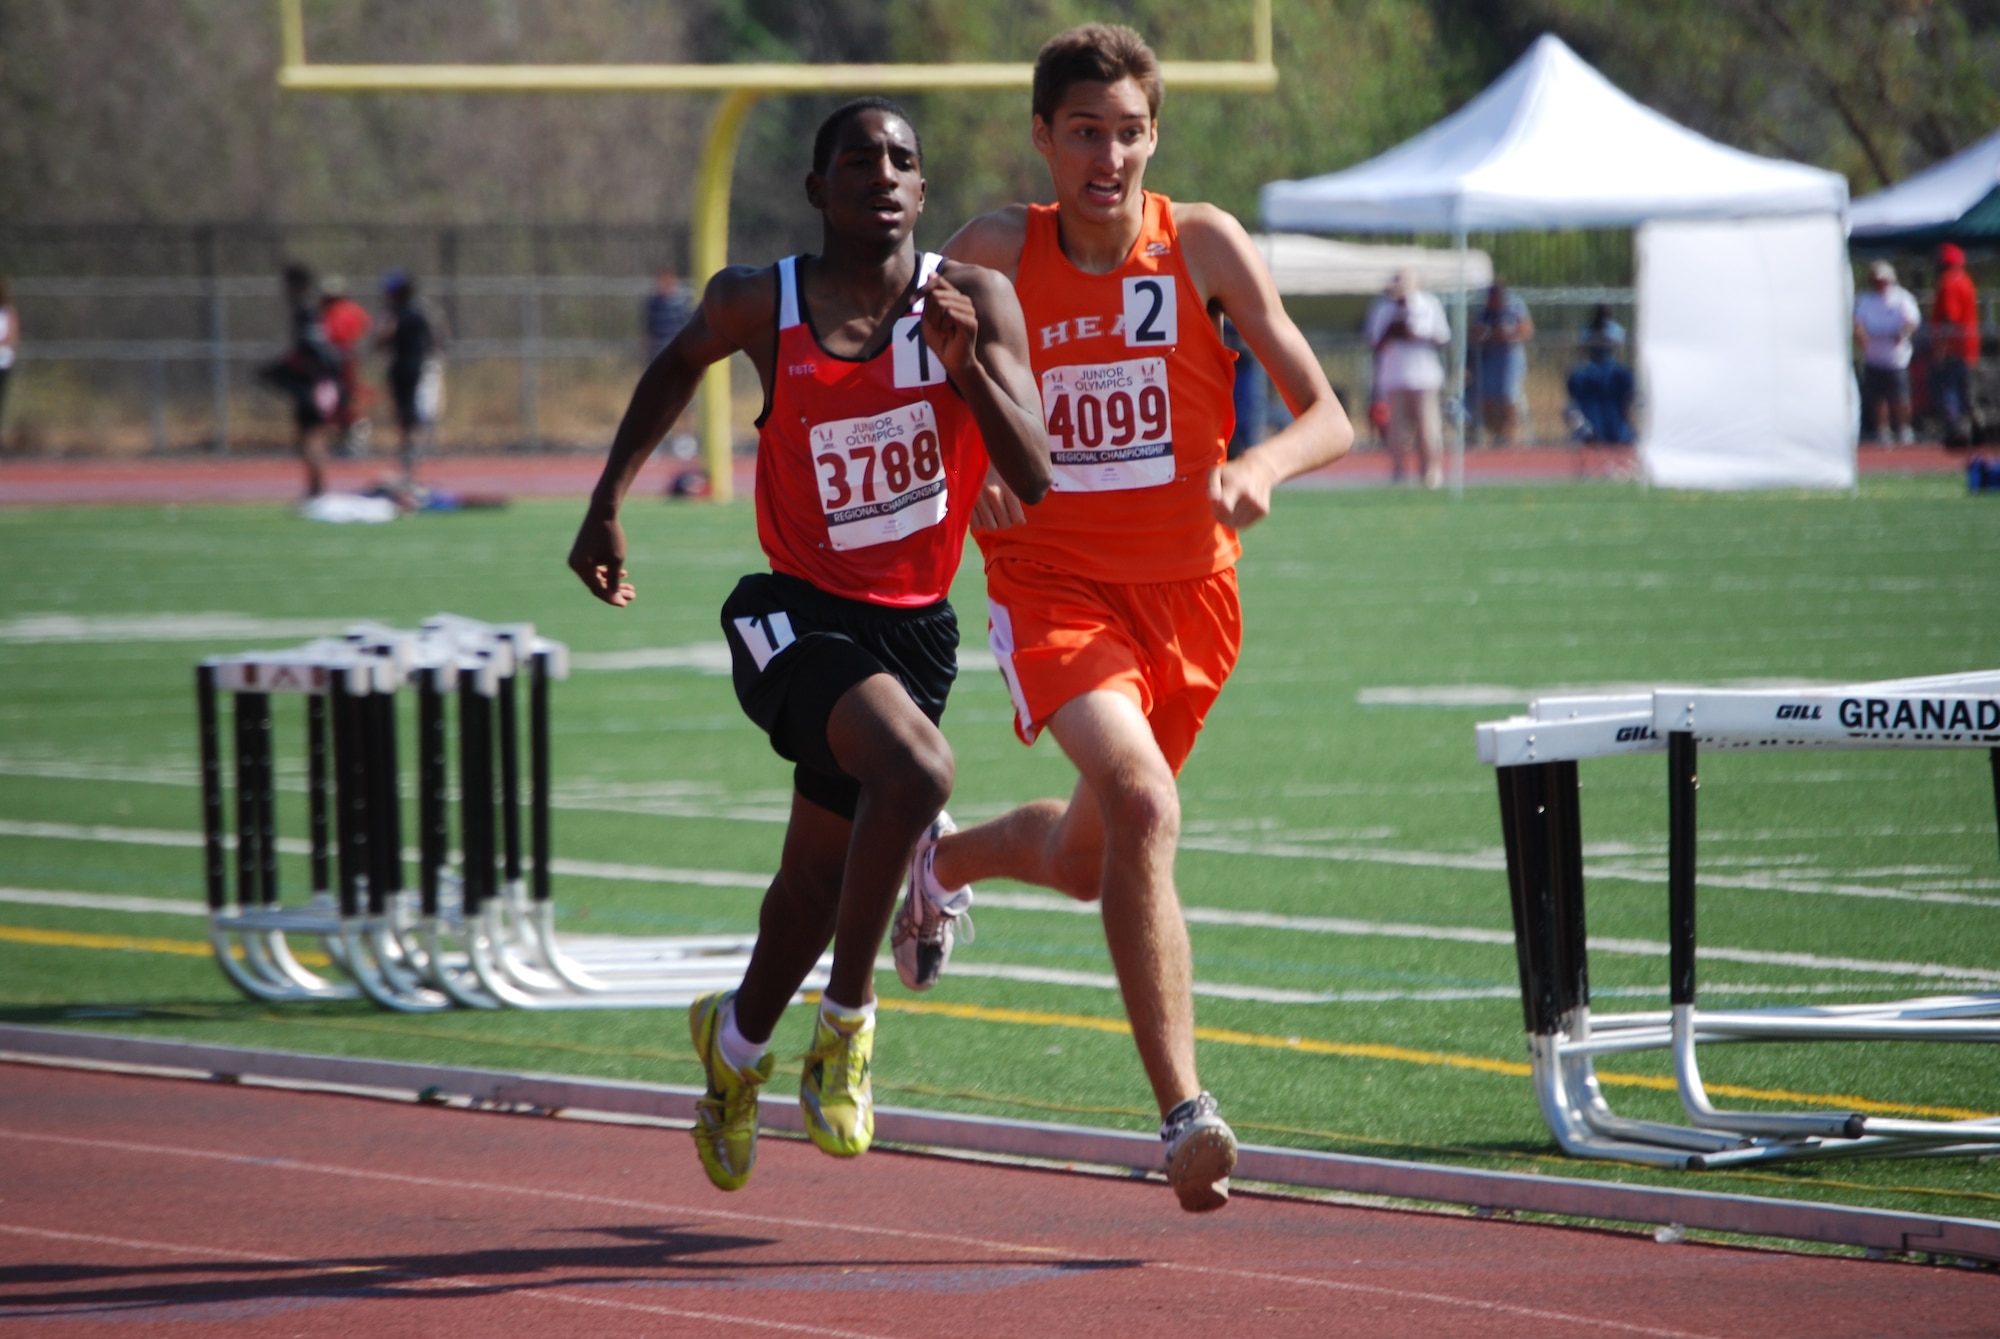 Kieren Broussard, left, competes in a recent track event. Broussard is the 16-year-old son of Senior Master Sgt. Donna Broussard, 349th Aeromedical Evacuation Squadron, and Greg, who founded and coaches the Full Stride Track Club. (Courtesy photo)